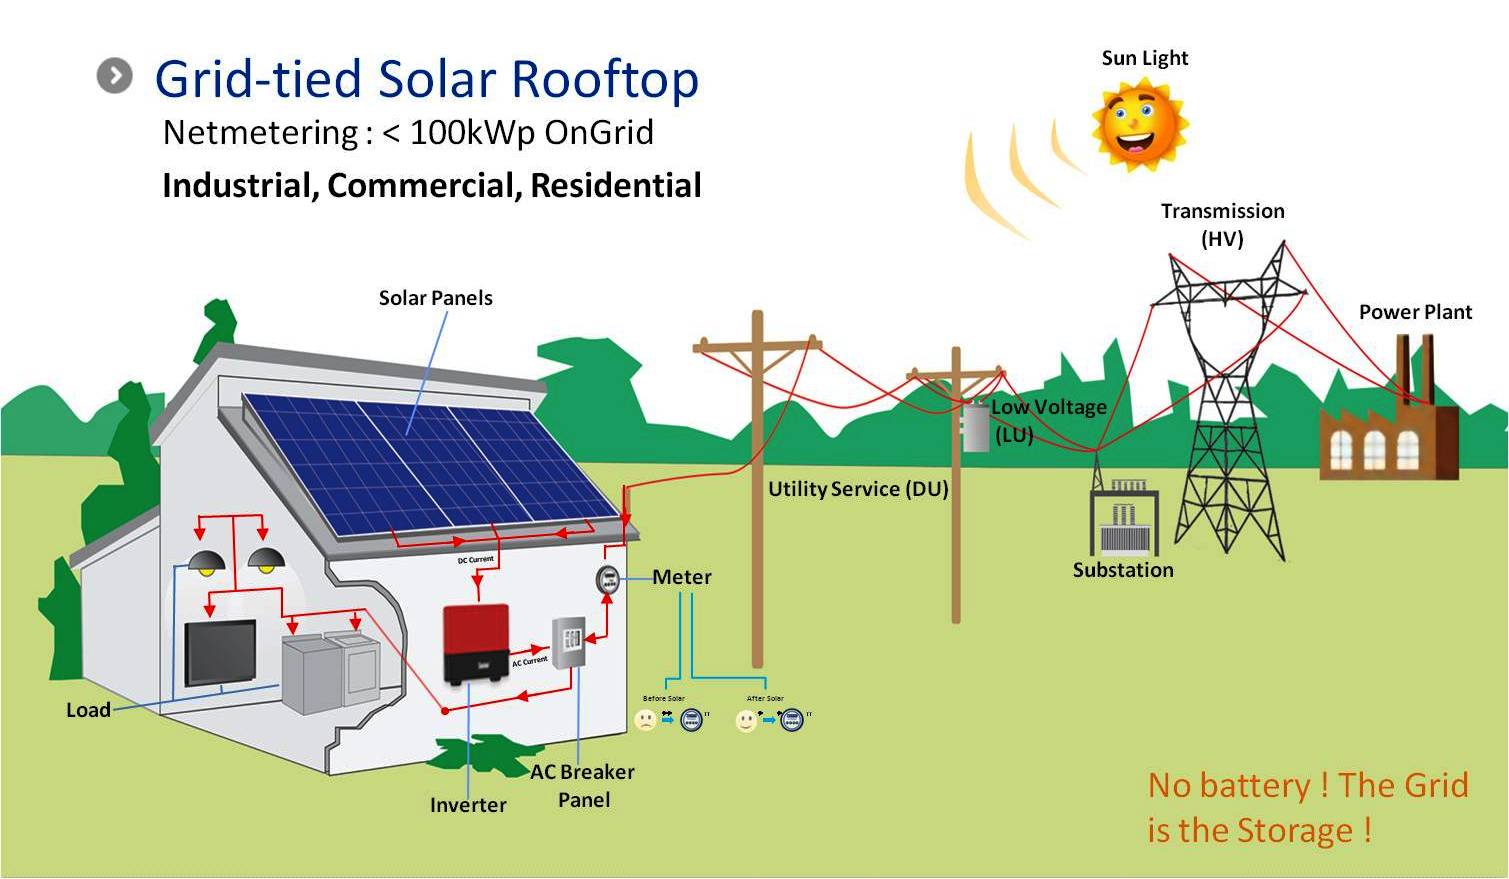 Grid-tied Solar Rooftop Systems